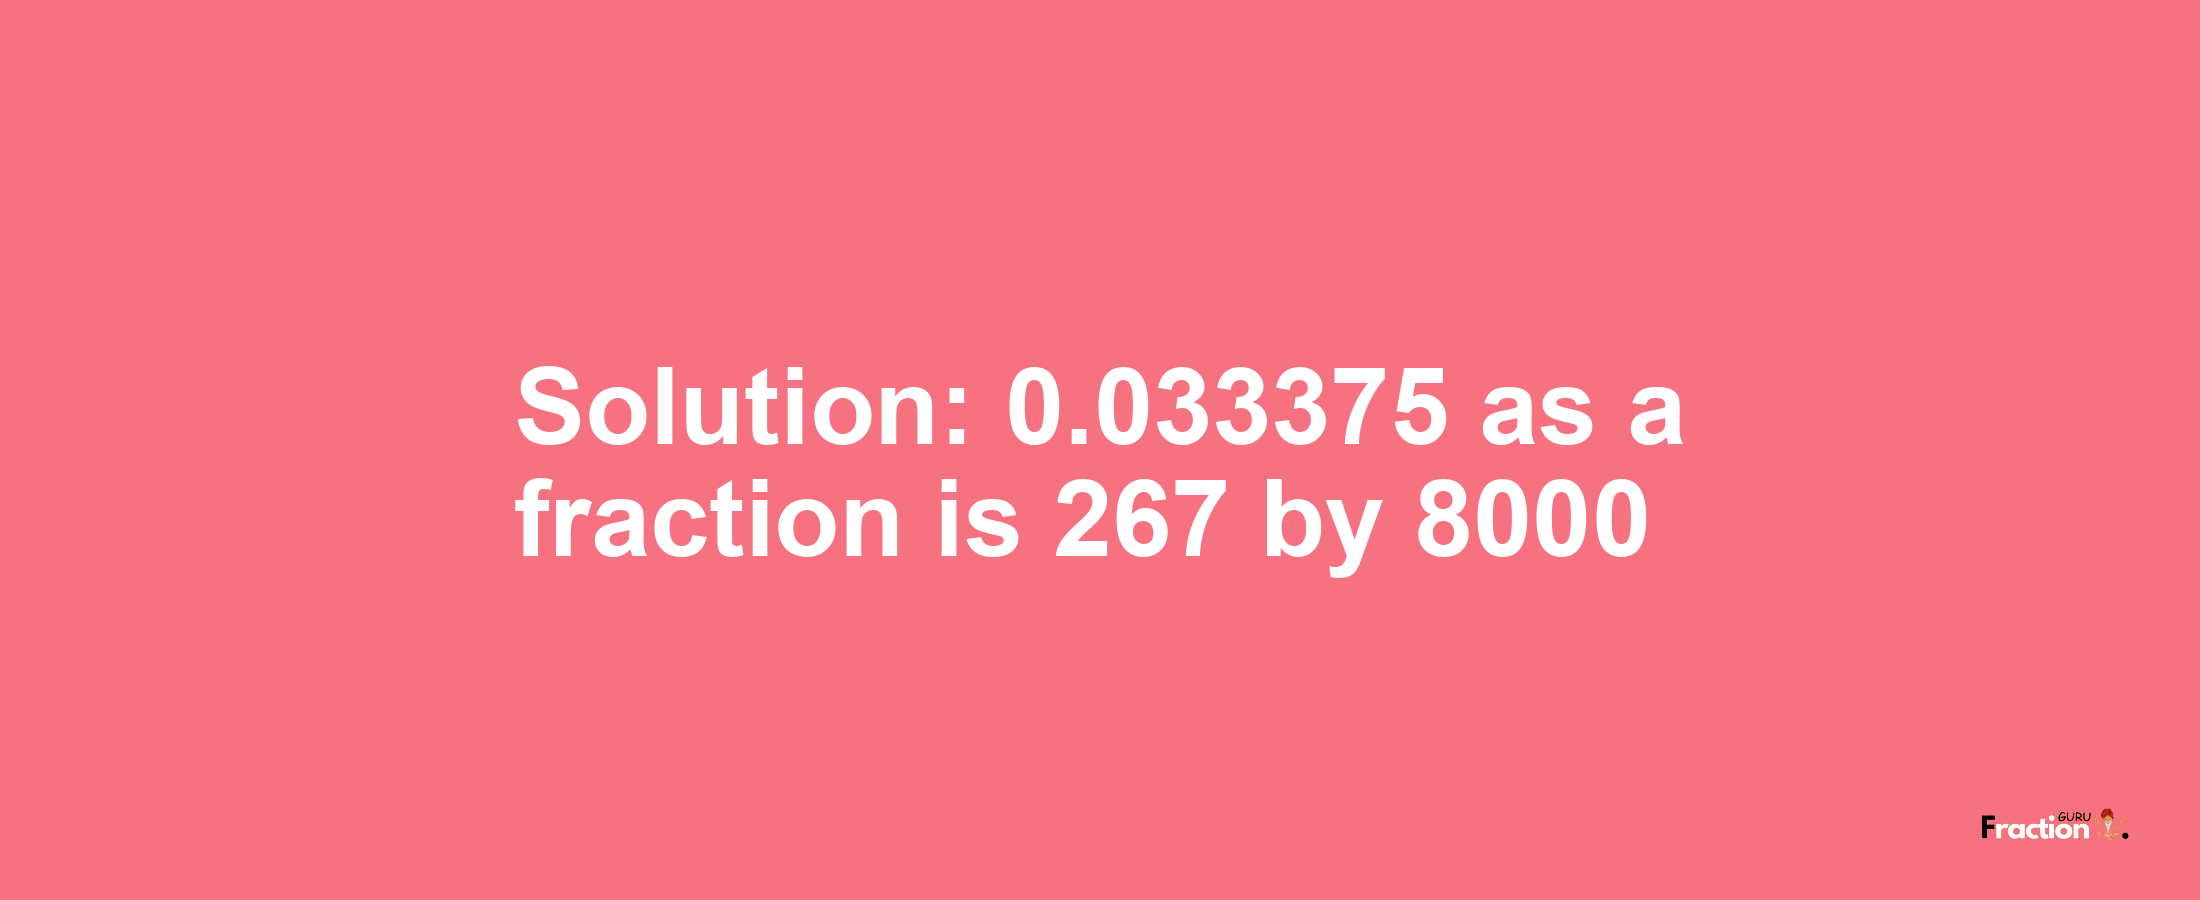 Solution:0.033375 as a fraction is 267/8000